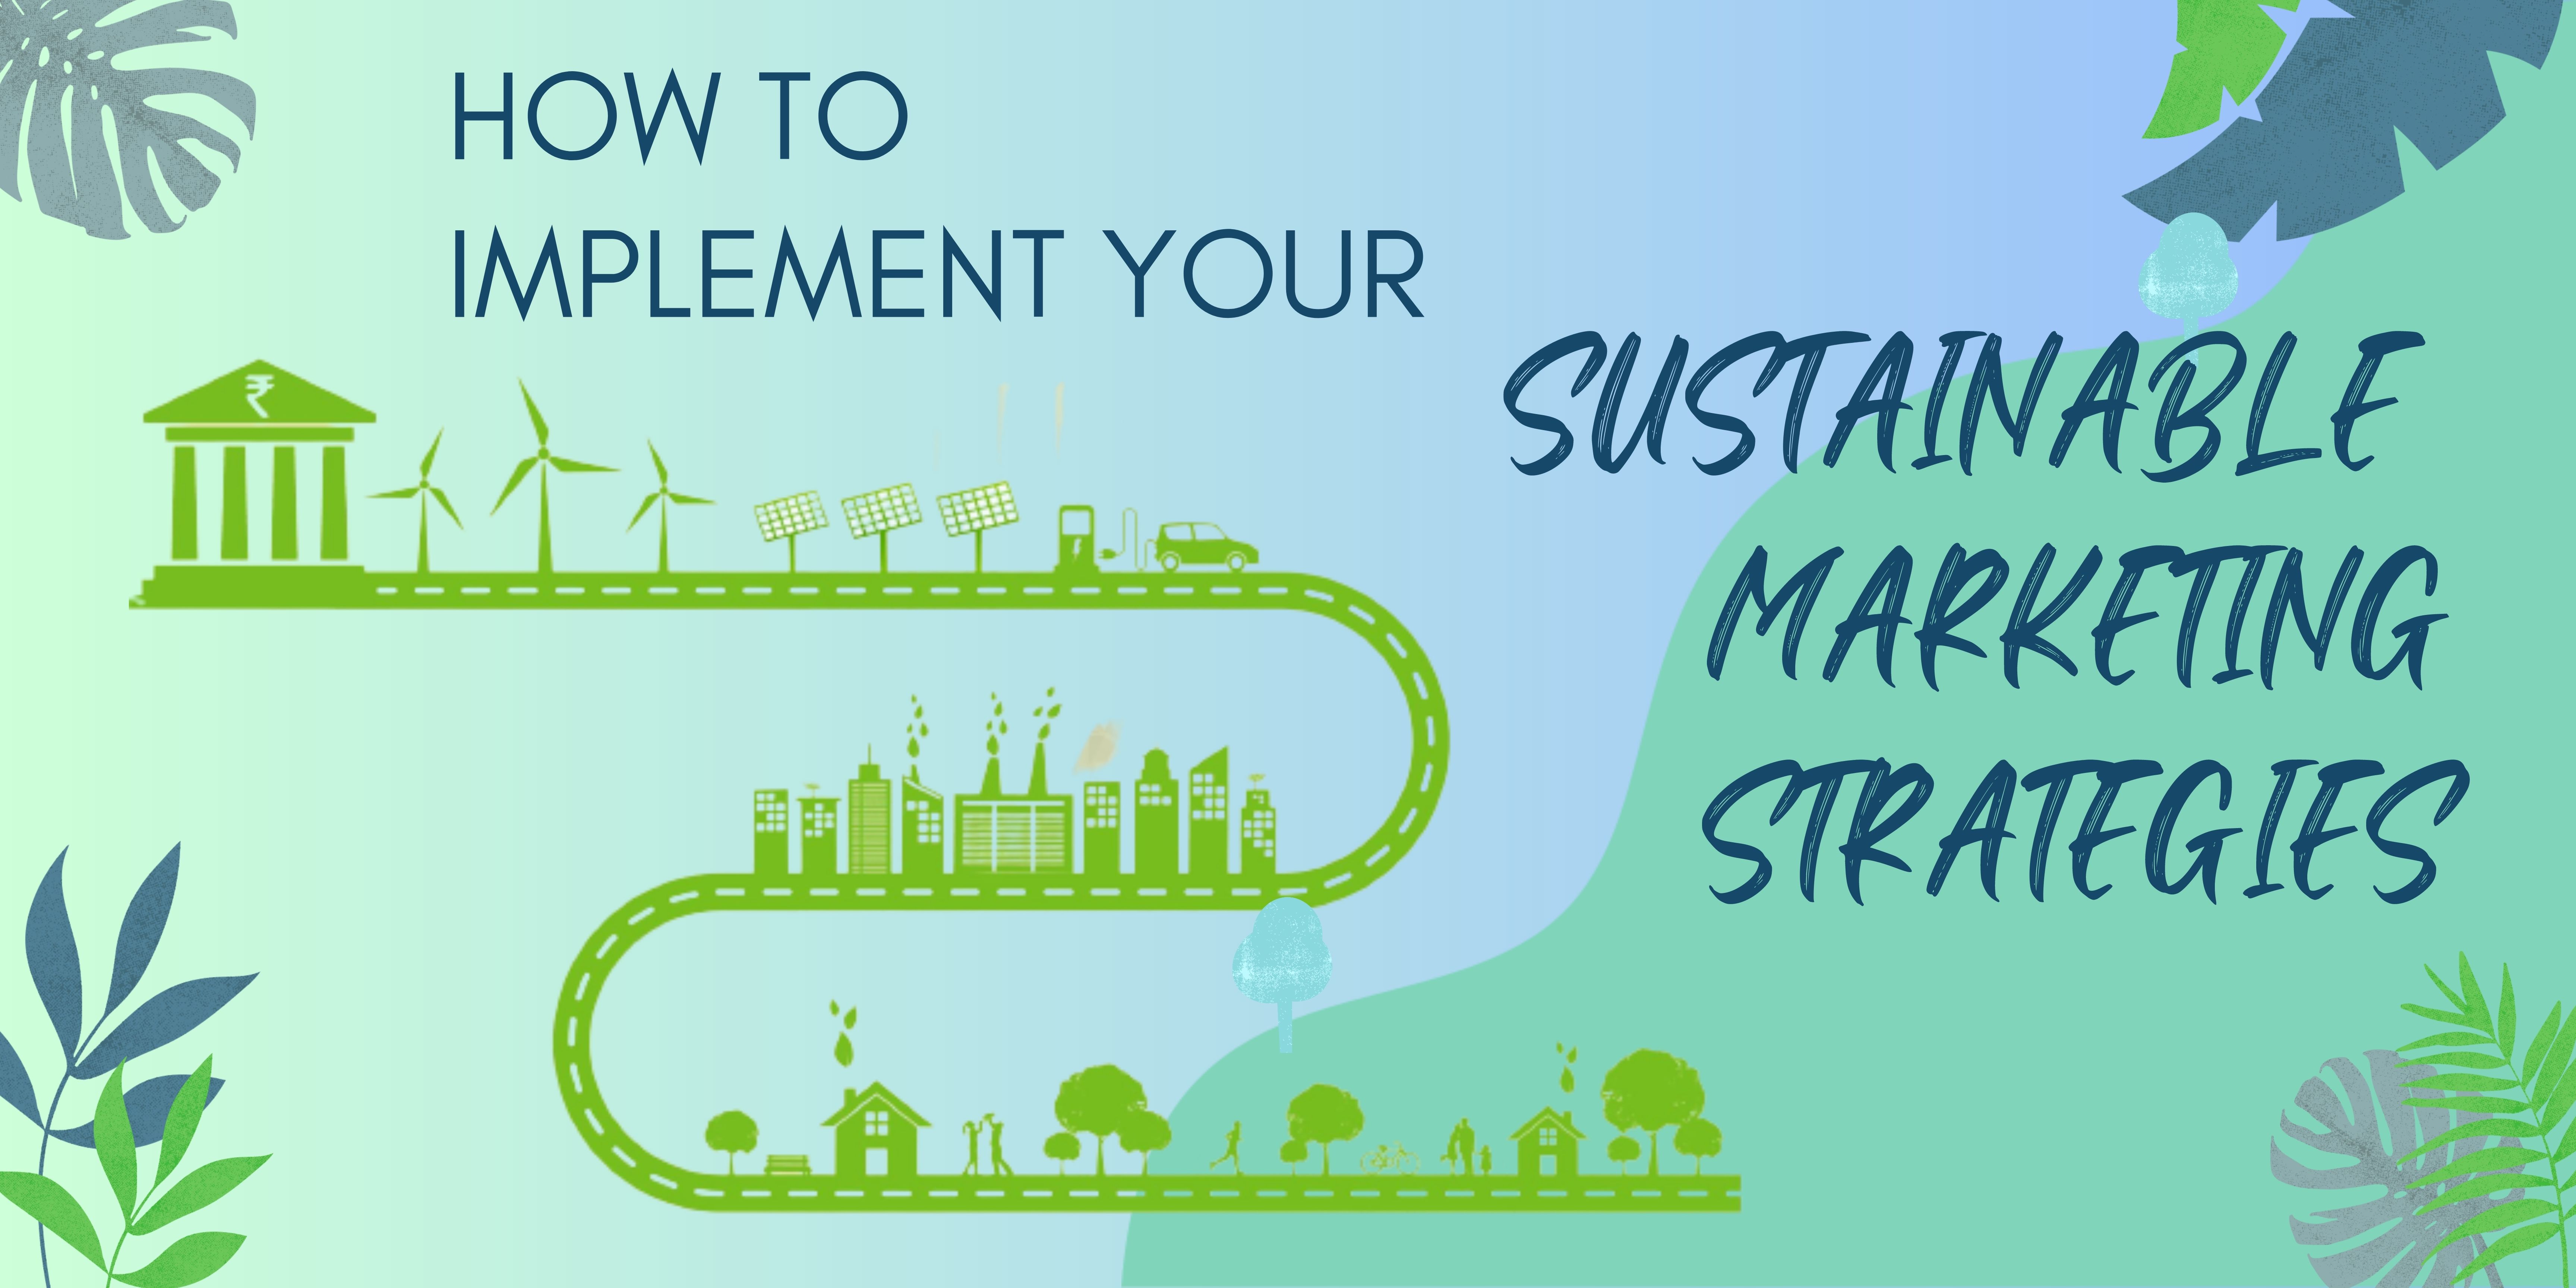 How to implement your sustainable marketing strategies